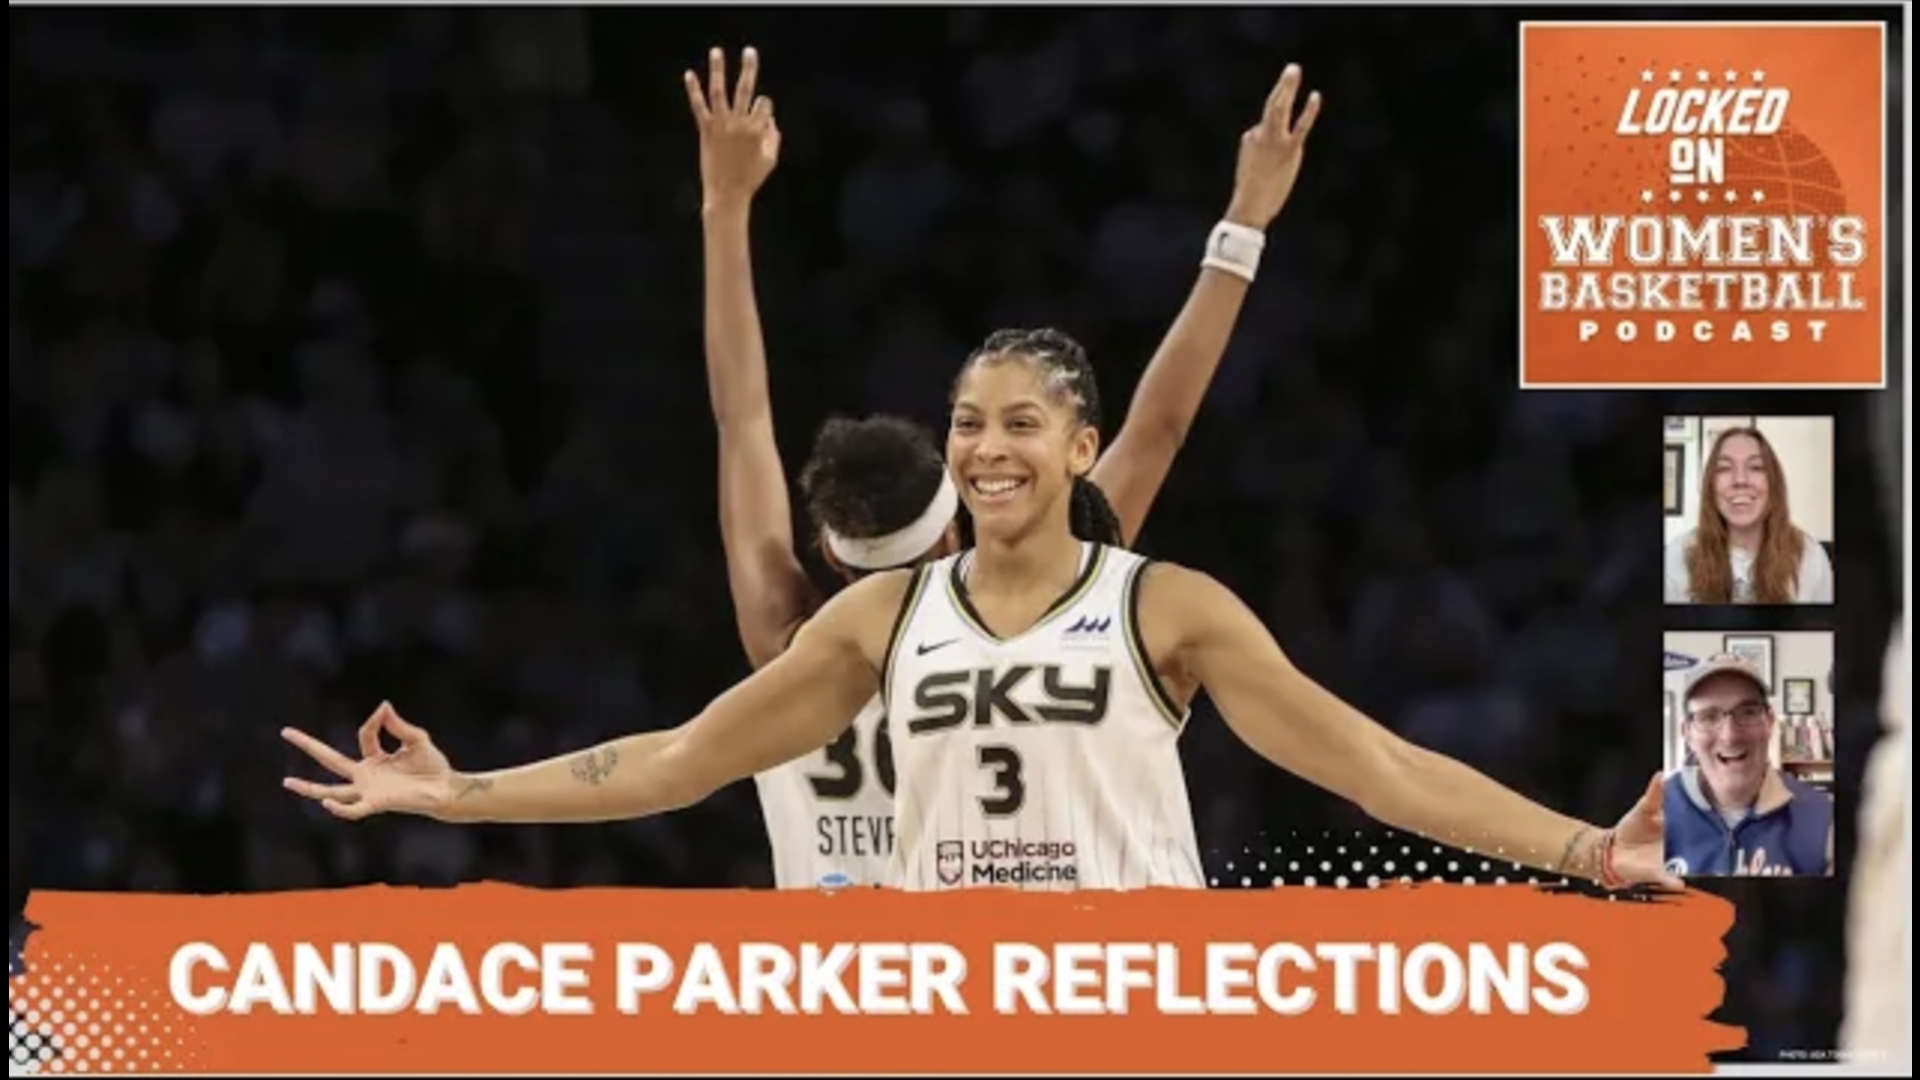 Annie Costabile of the Chicago Sun-Times, star reporter covering the Chicago Sky, joins host Howard Megdal to discuss the retirement of Candace Parker